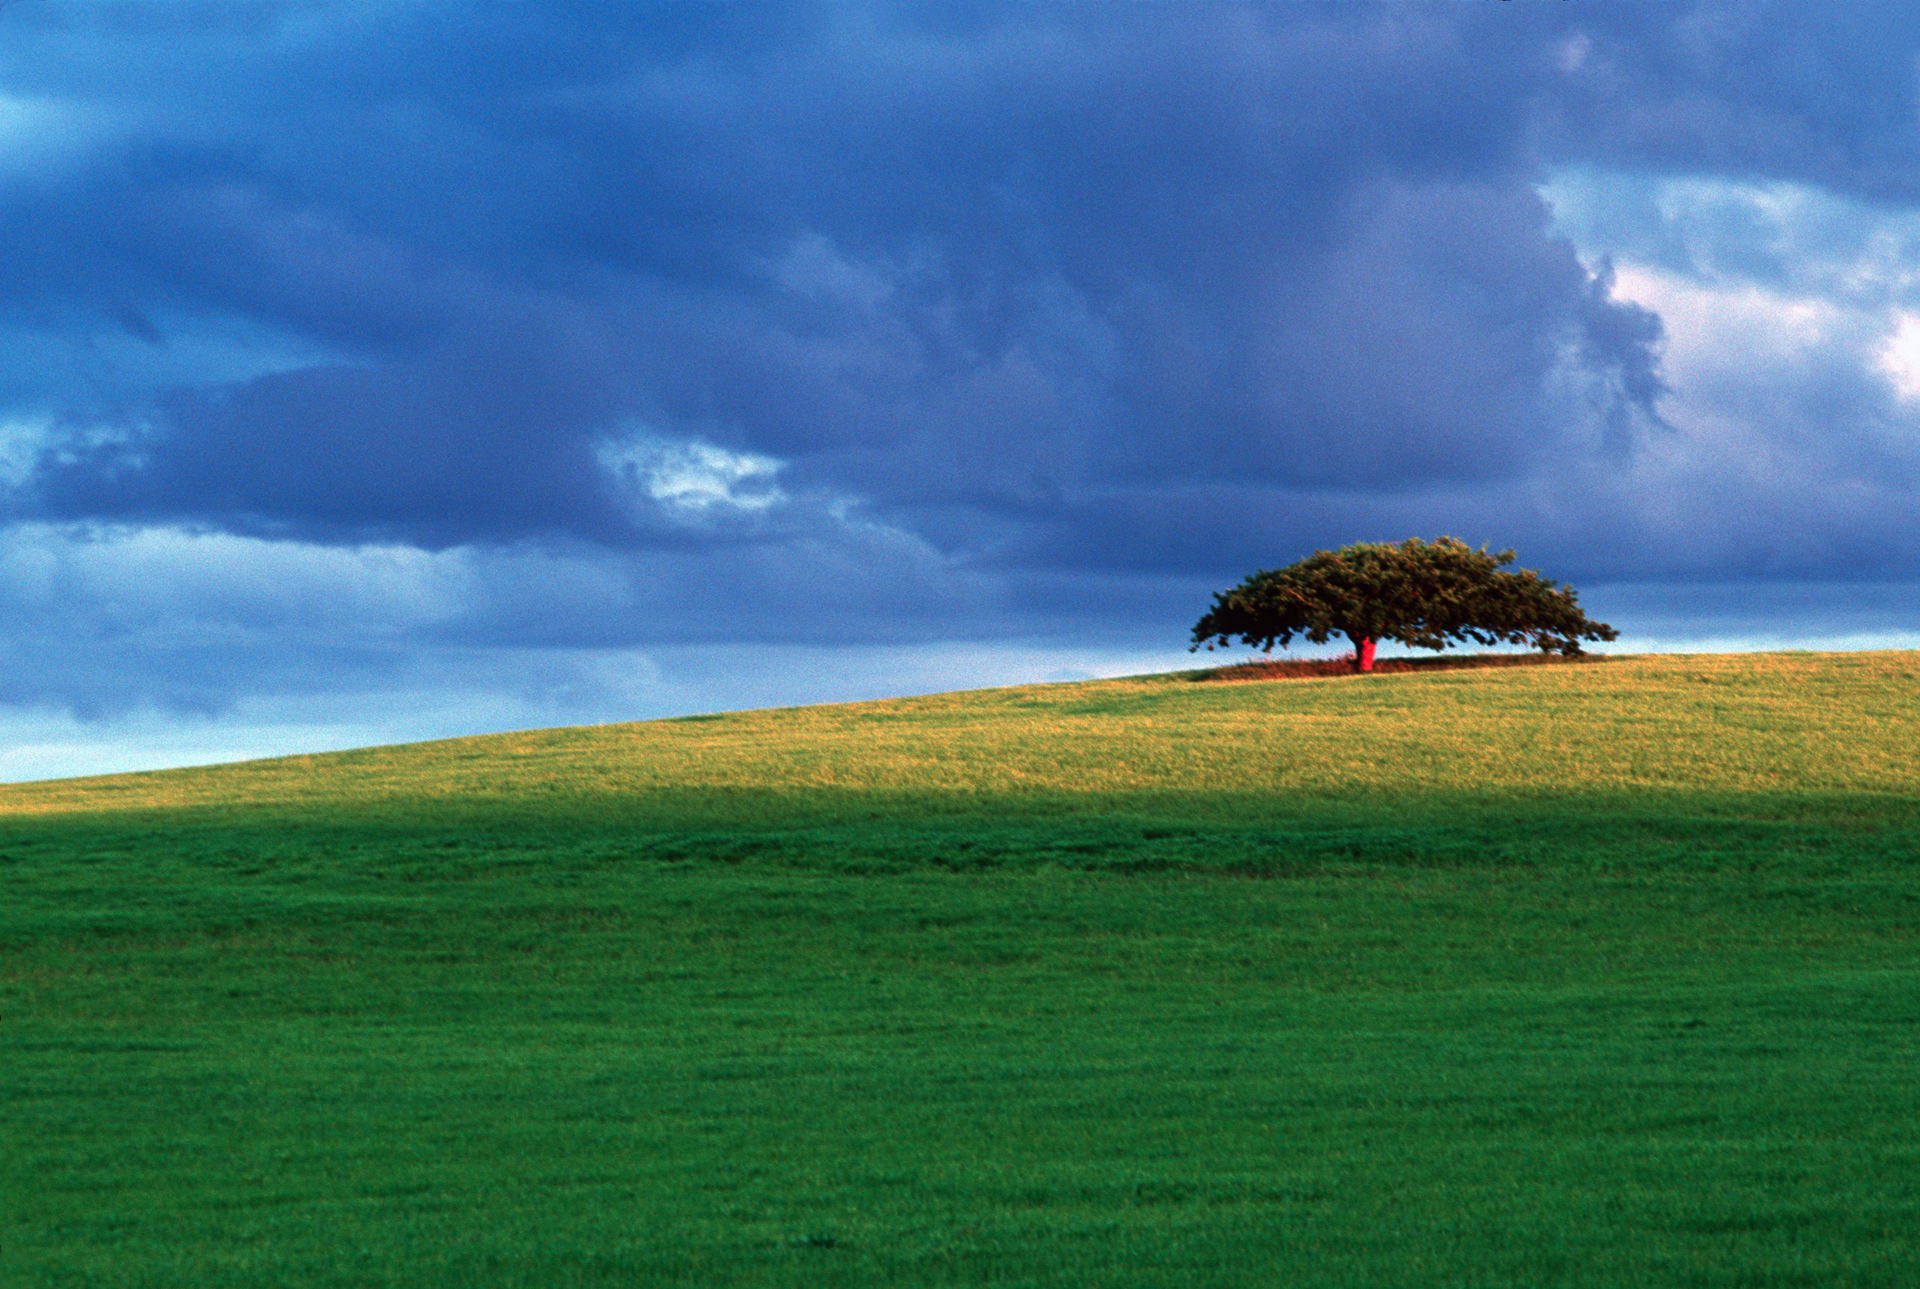  In the Midlands between Launceston and Campbelltown, a lone tree hovers over the hillside.  Launceston  